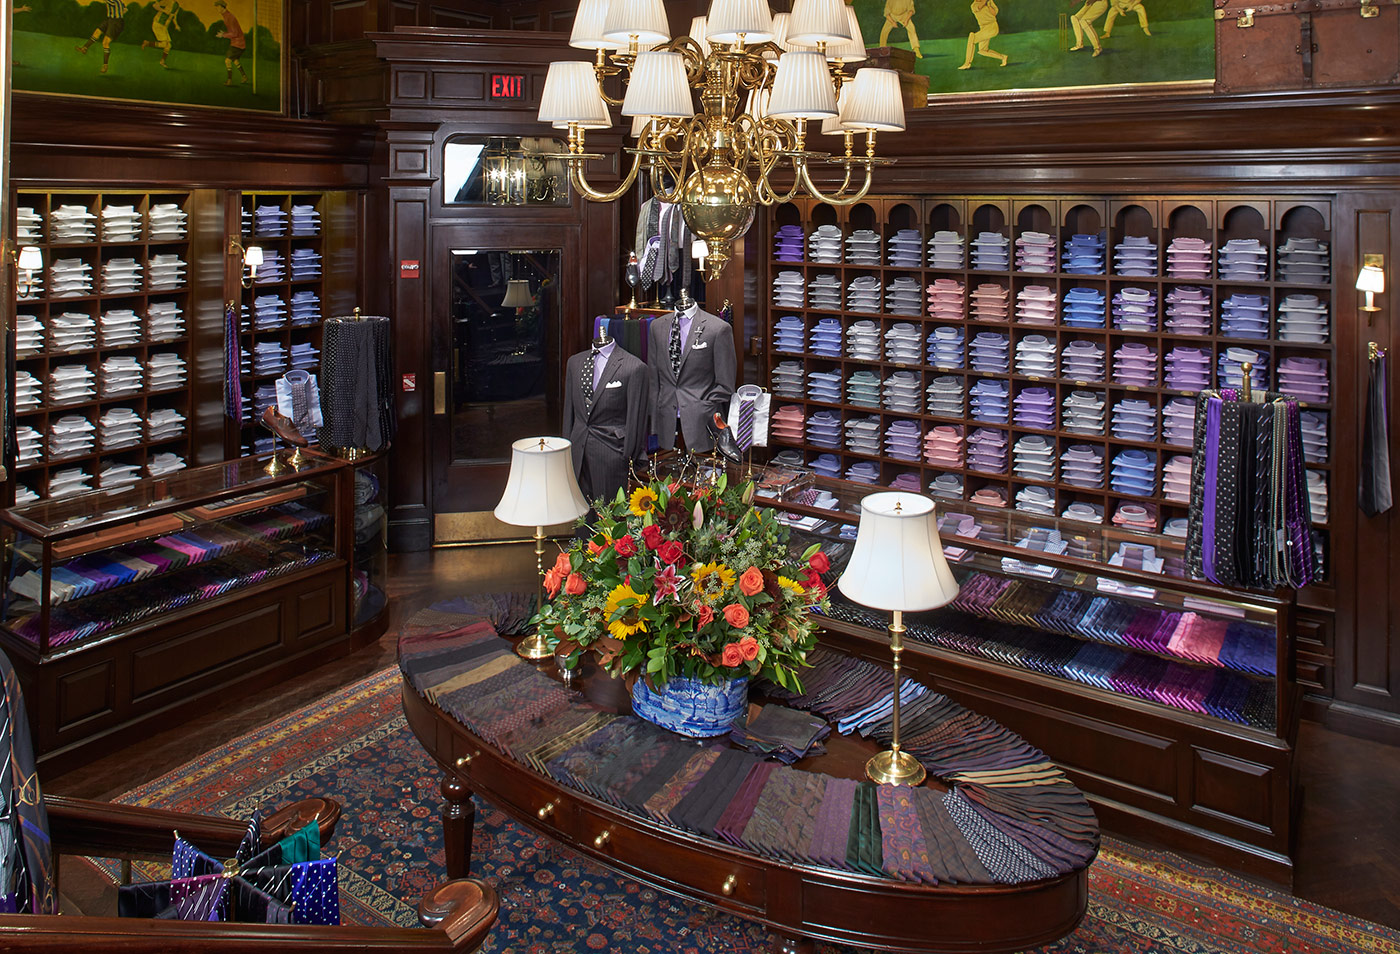 Ralph Lauren Polo Opens First Flagship Store on Fifth Avenue